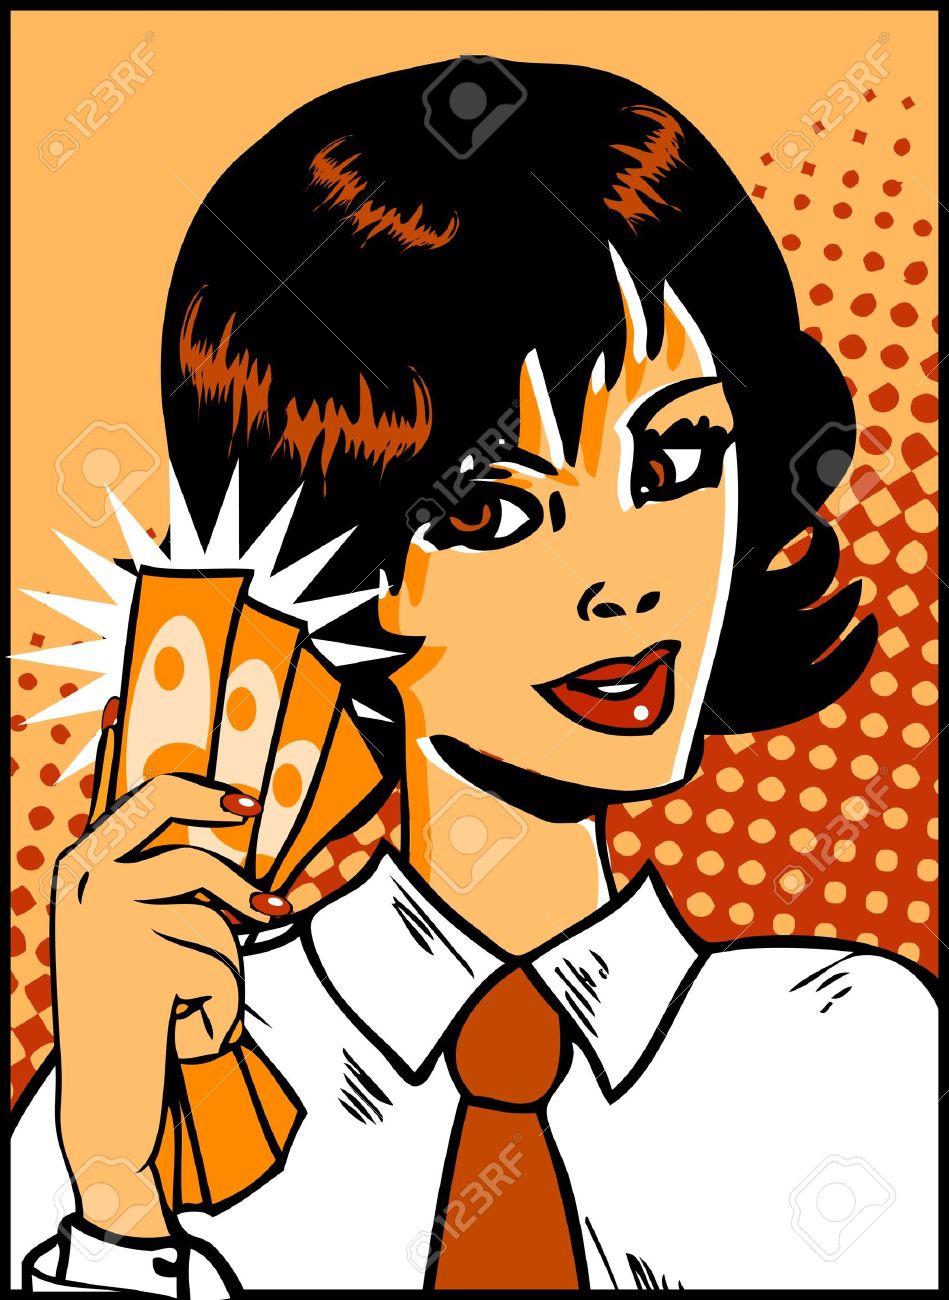 9631866-Pop-Art-Business-Woman-with-money-in-hand-Vintage-Comic-Background-Stock-Vector